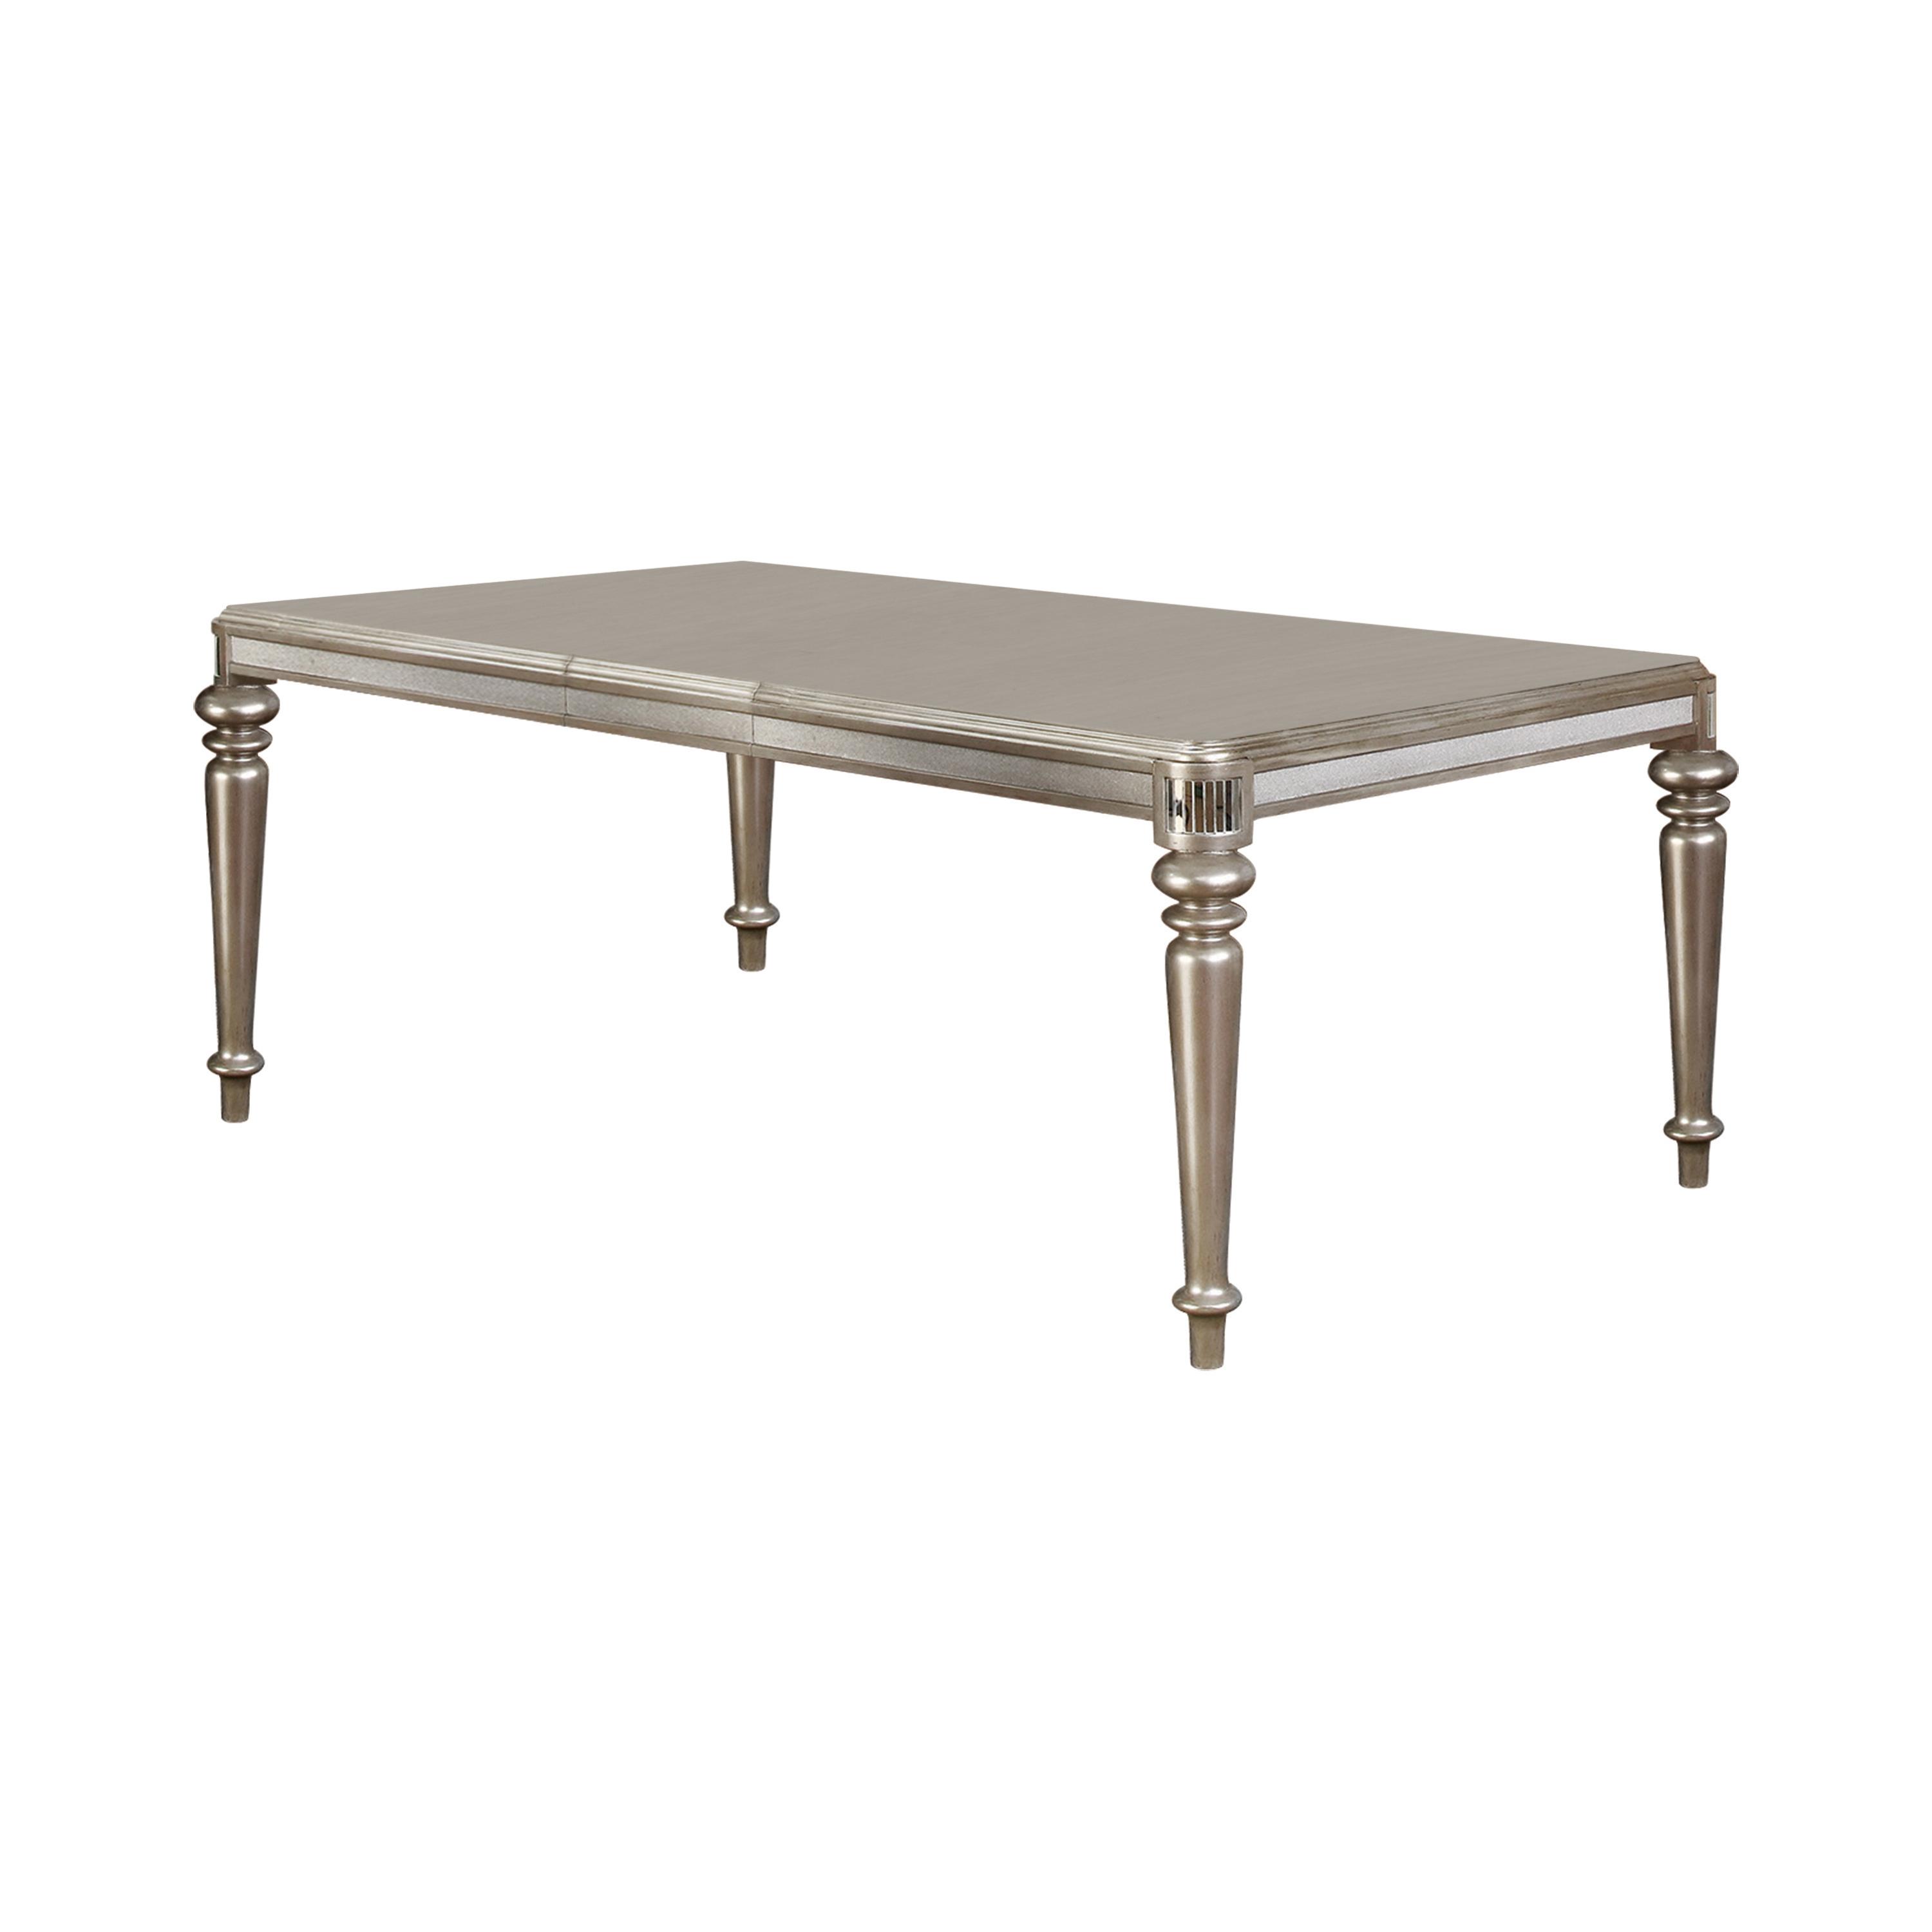 Contemporary Dining Table 106471 Danette 106471 in Platinum 